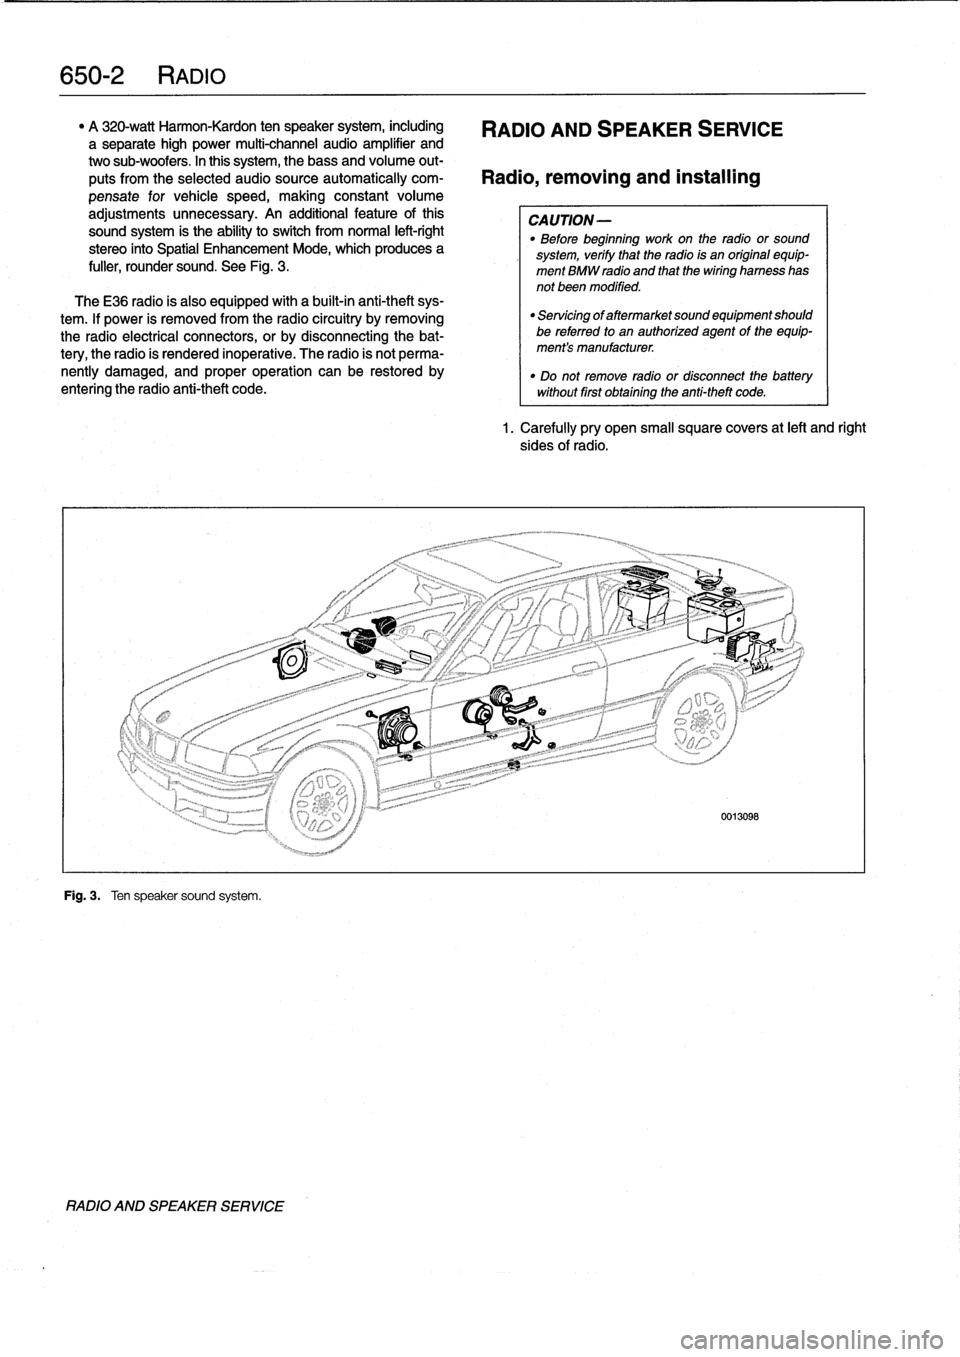 BMW M3 1993 E36 User Guide 
650-2
RADIO

"
A
320-watt
Harmon-Kardon
ten
speaker
system,
including

	

RADIO
AND
SPEAKER
SERVICE
a
separate
high
power
multi-channel
audio
amplifier
and
two
sub-woofers
.
In
this
system,
thebass
a